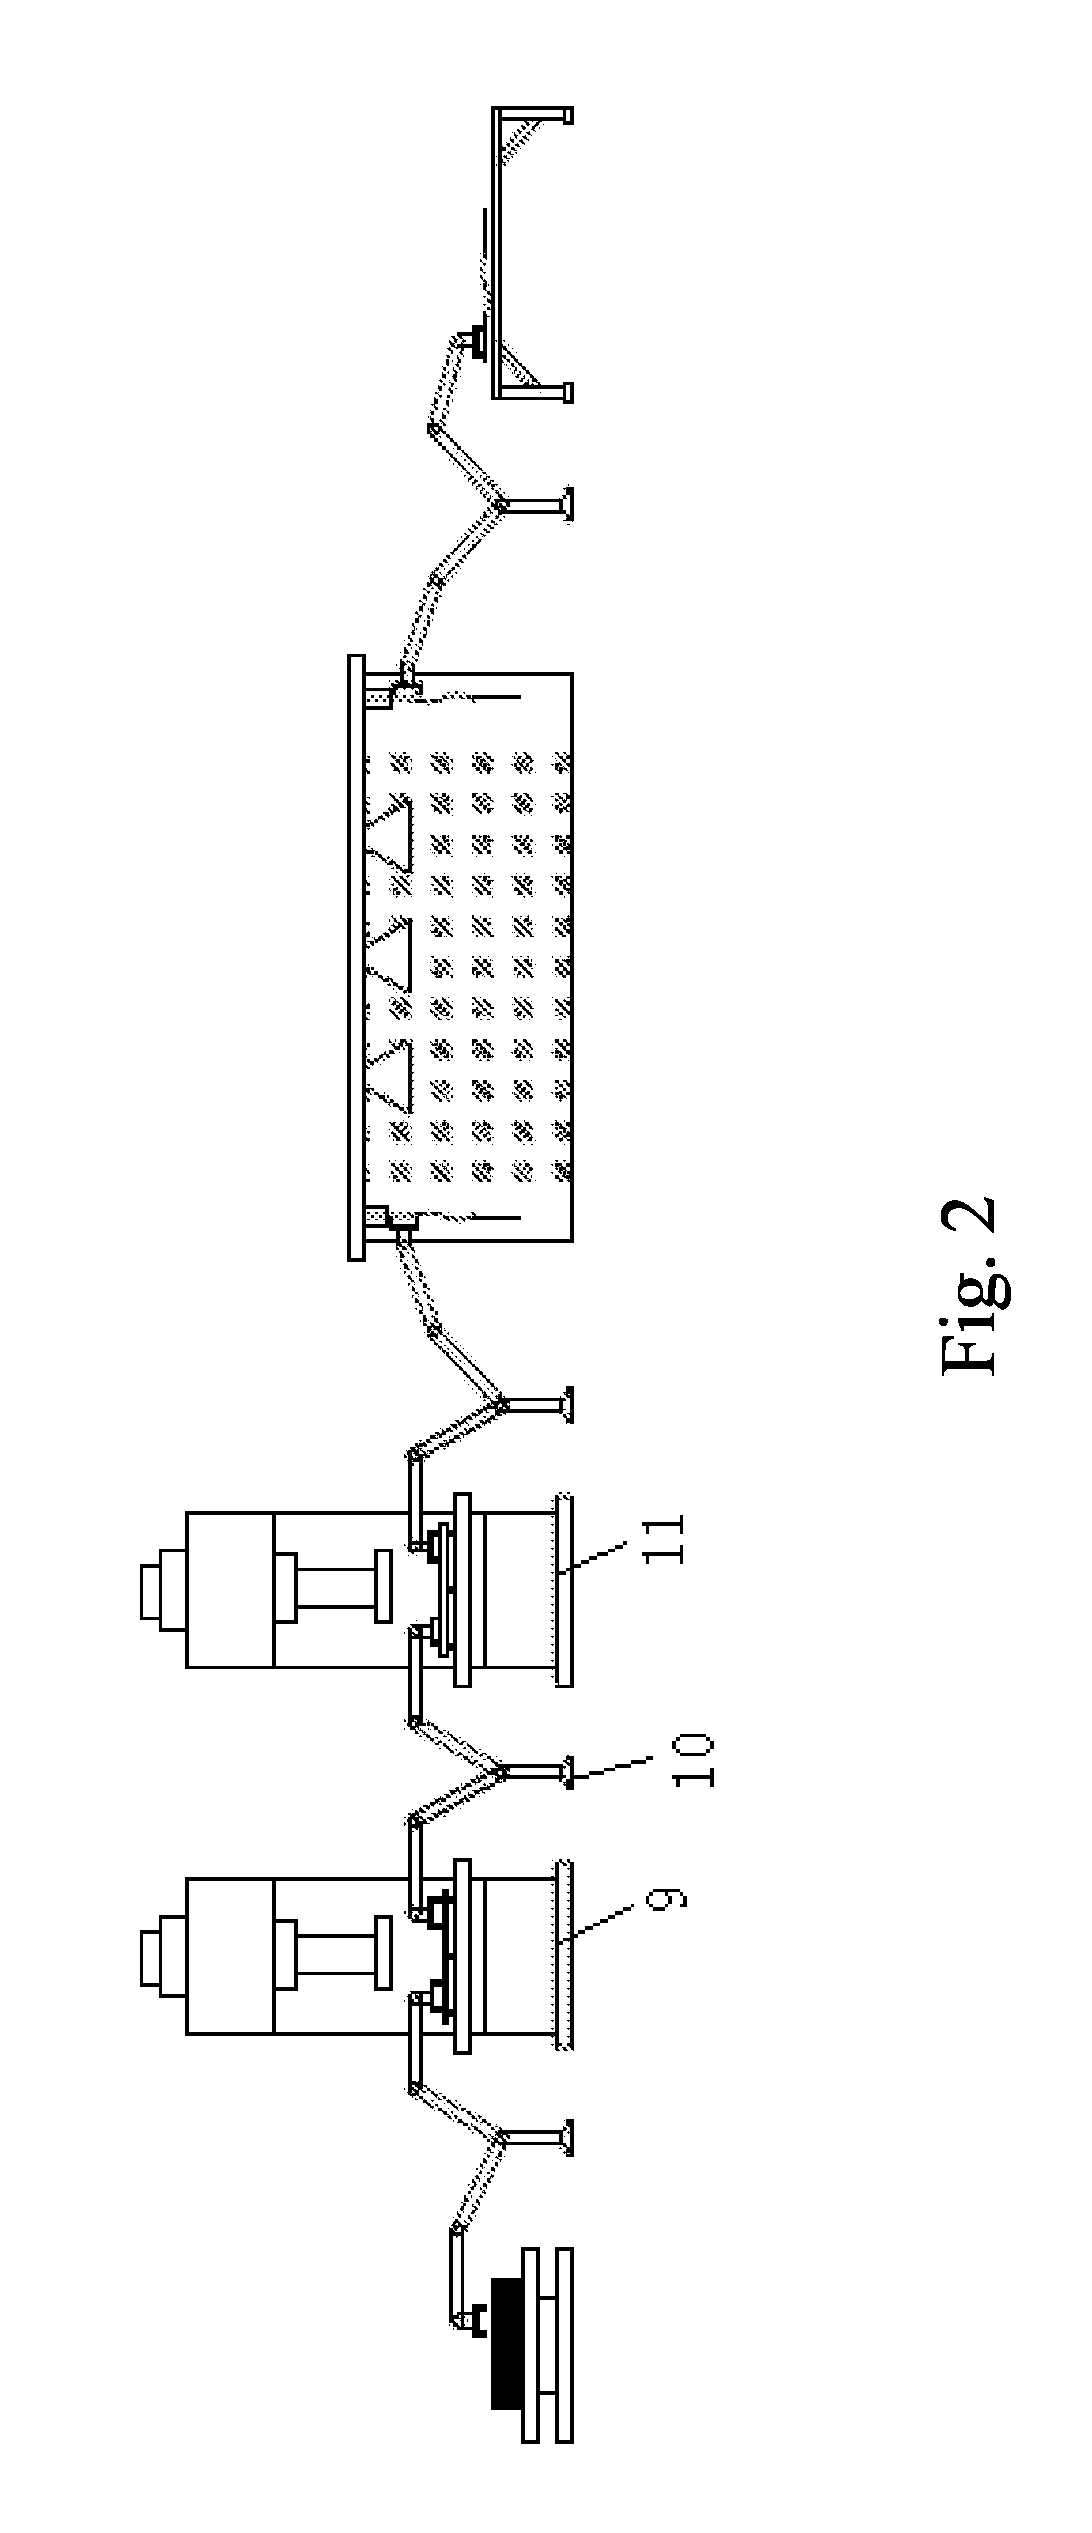 Multi-station continuous hot stamping production line and method